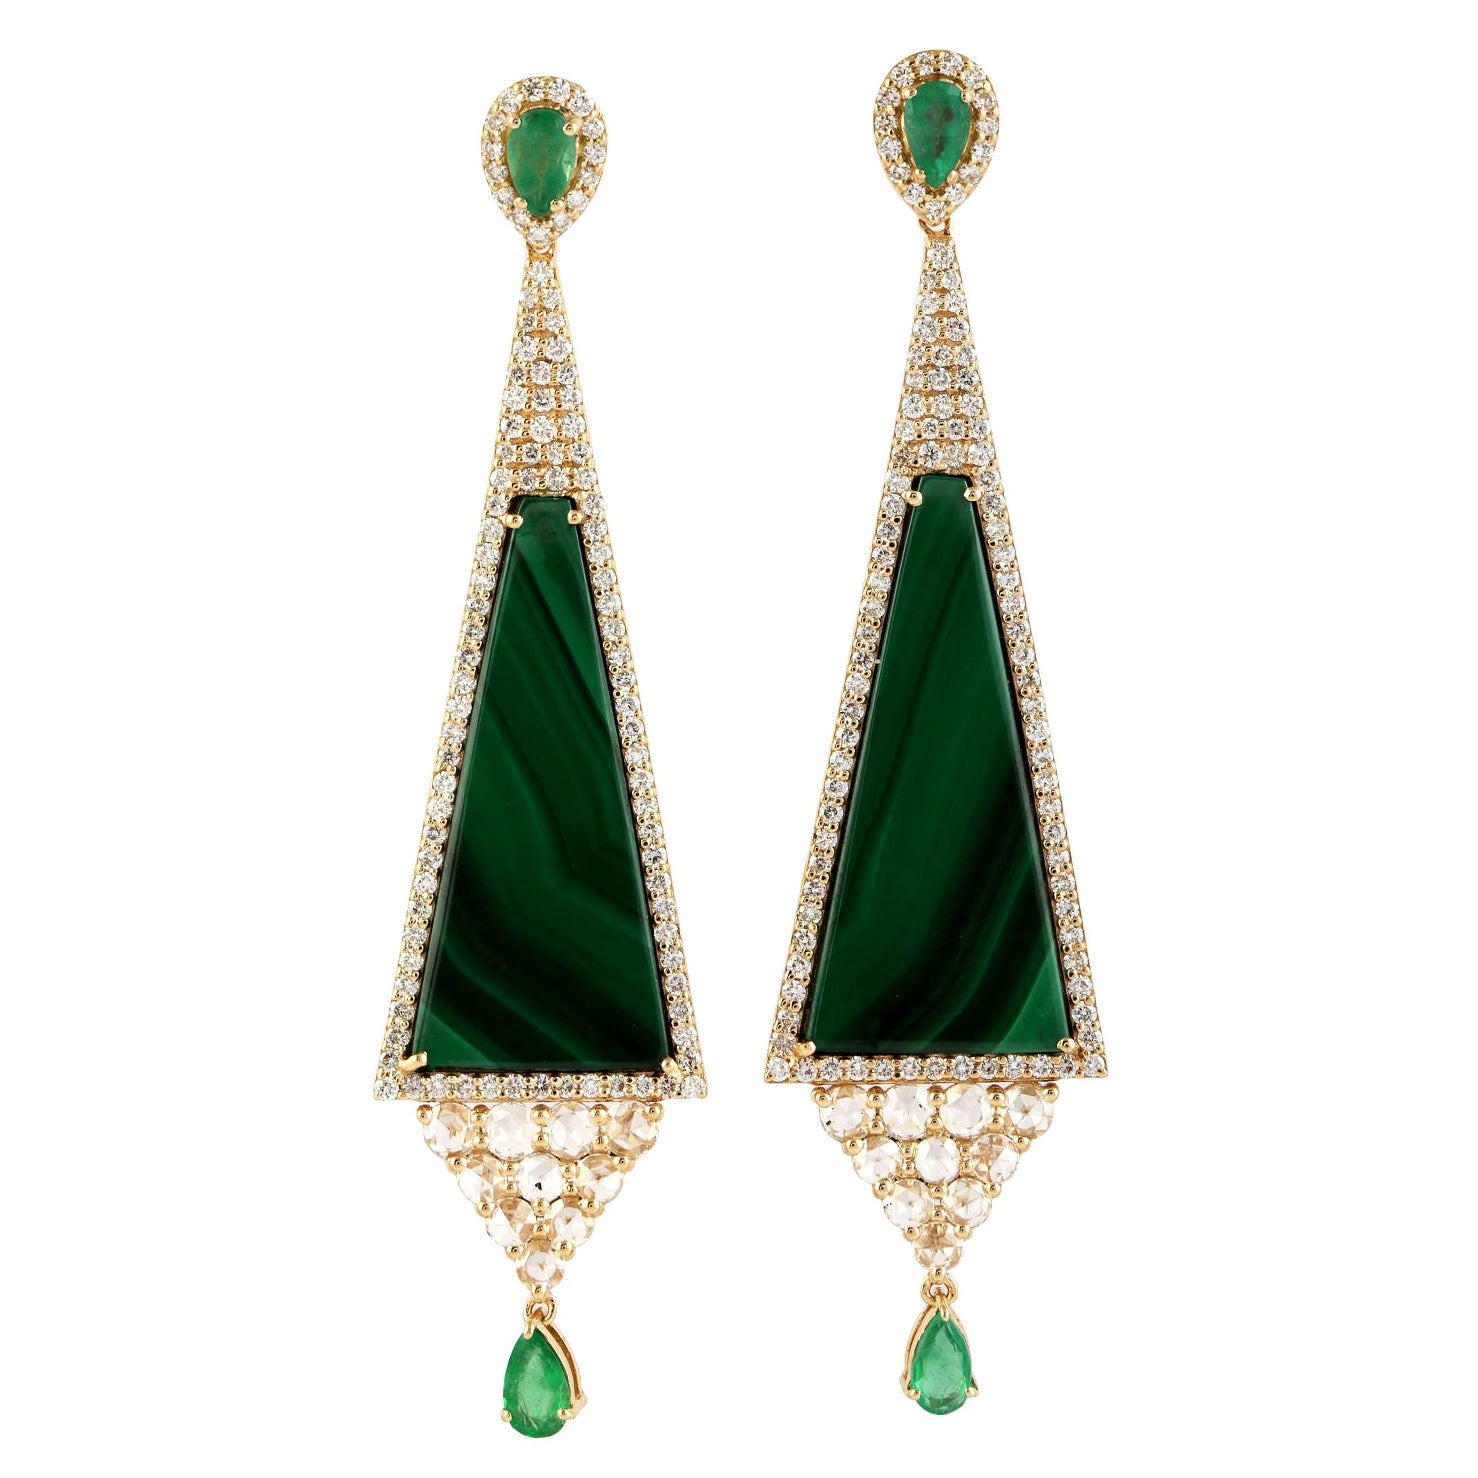 Pyramid Shaped Malachite Earring with Emerald & Pave Diamonds in 18k Yellow Gold